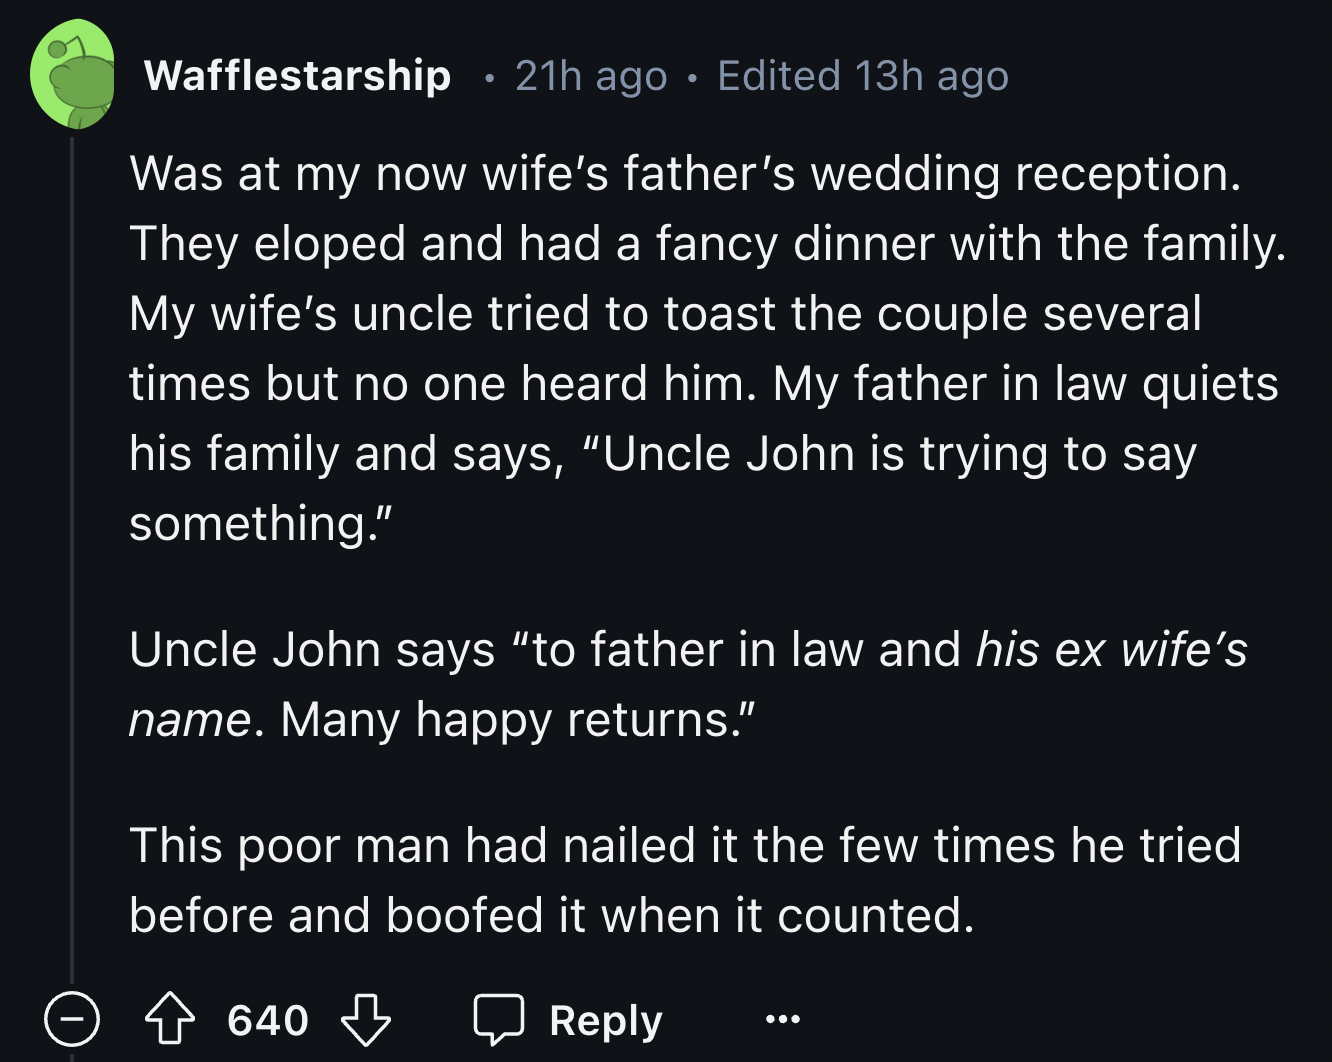 screenshot - Wafflestarship 21h ago Edited 13h ago Was at my now wife's father's wedding reception. They eloped and had a fancy dinner with the family. My wife's uncle tried to toast the couple several times but no one heard him. My father in law quiets h